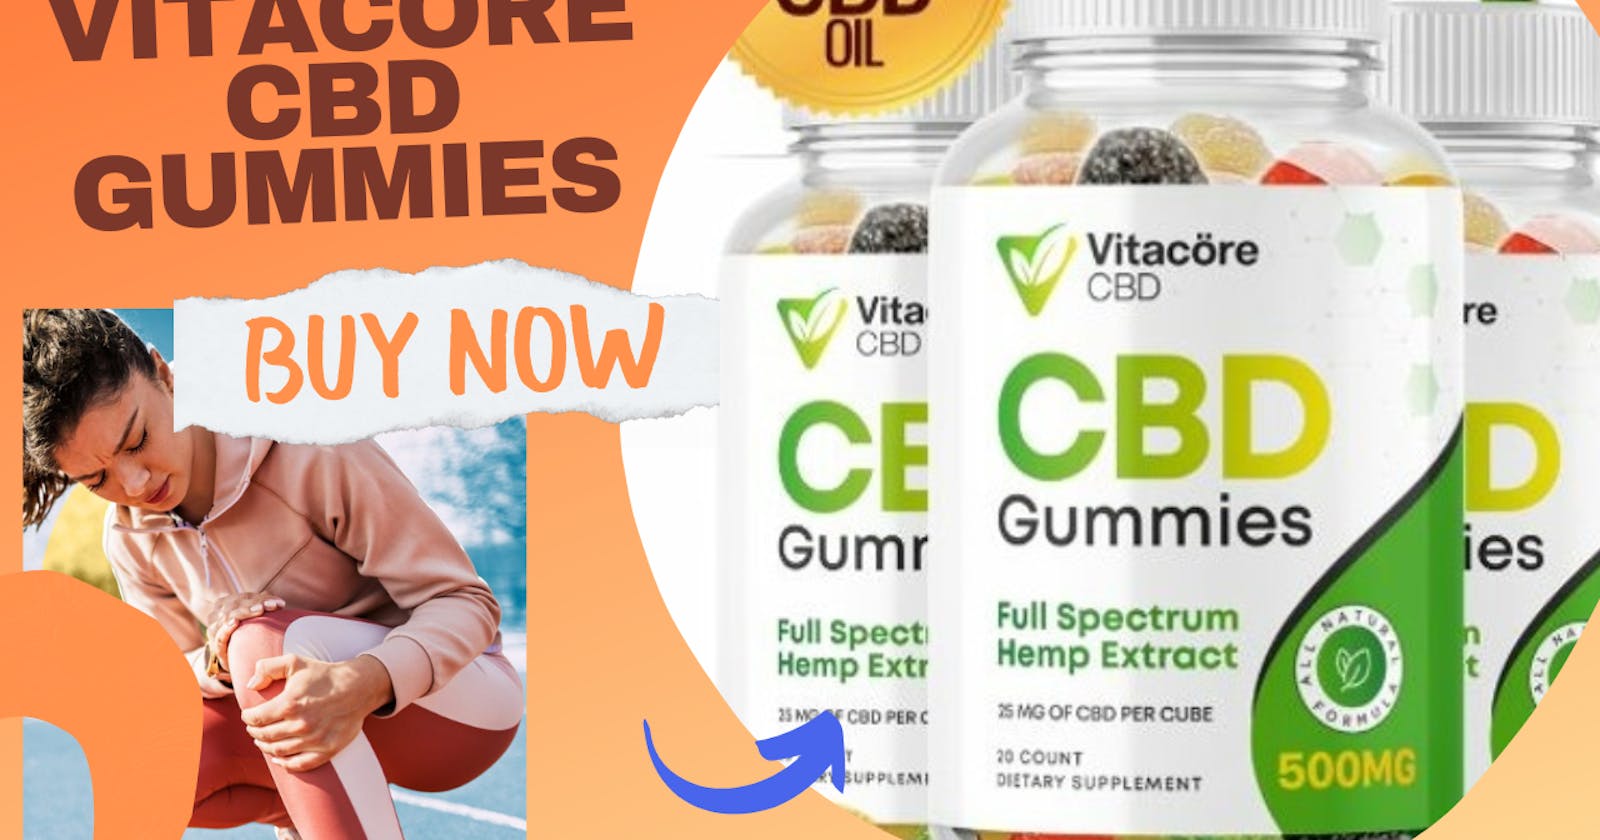 Vitacore CBD Gummies Reviews (Shocking Facts), Ingredients, Pain Relief, Advantage, Price & Where can I buy?